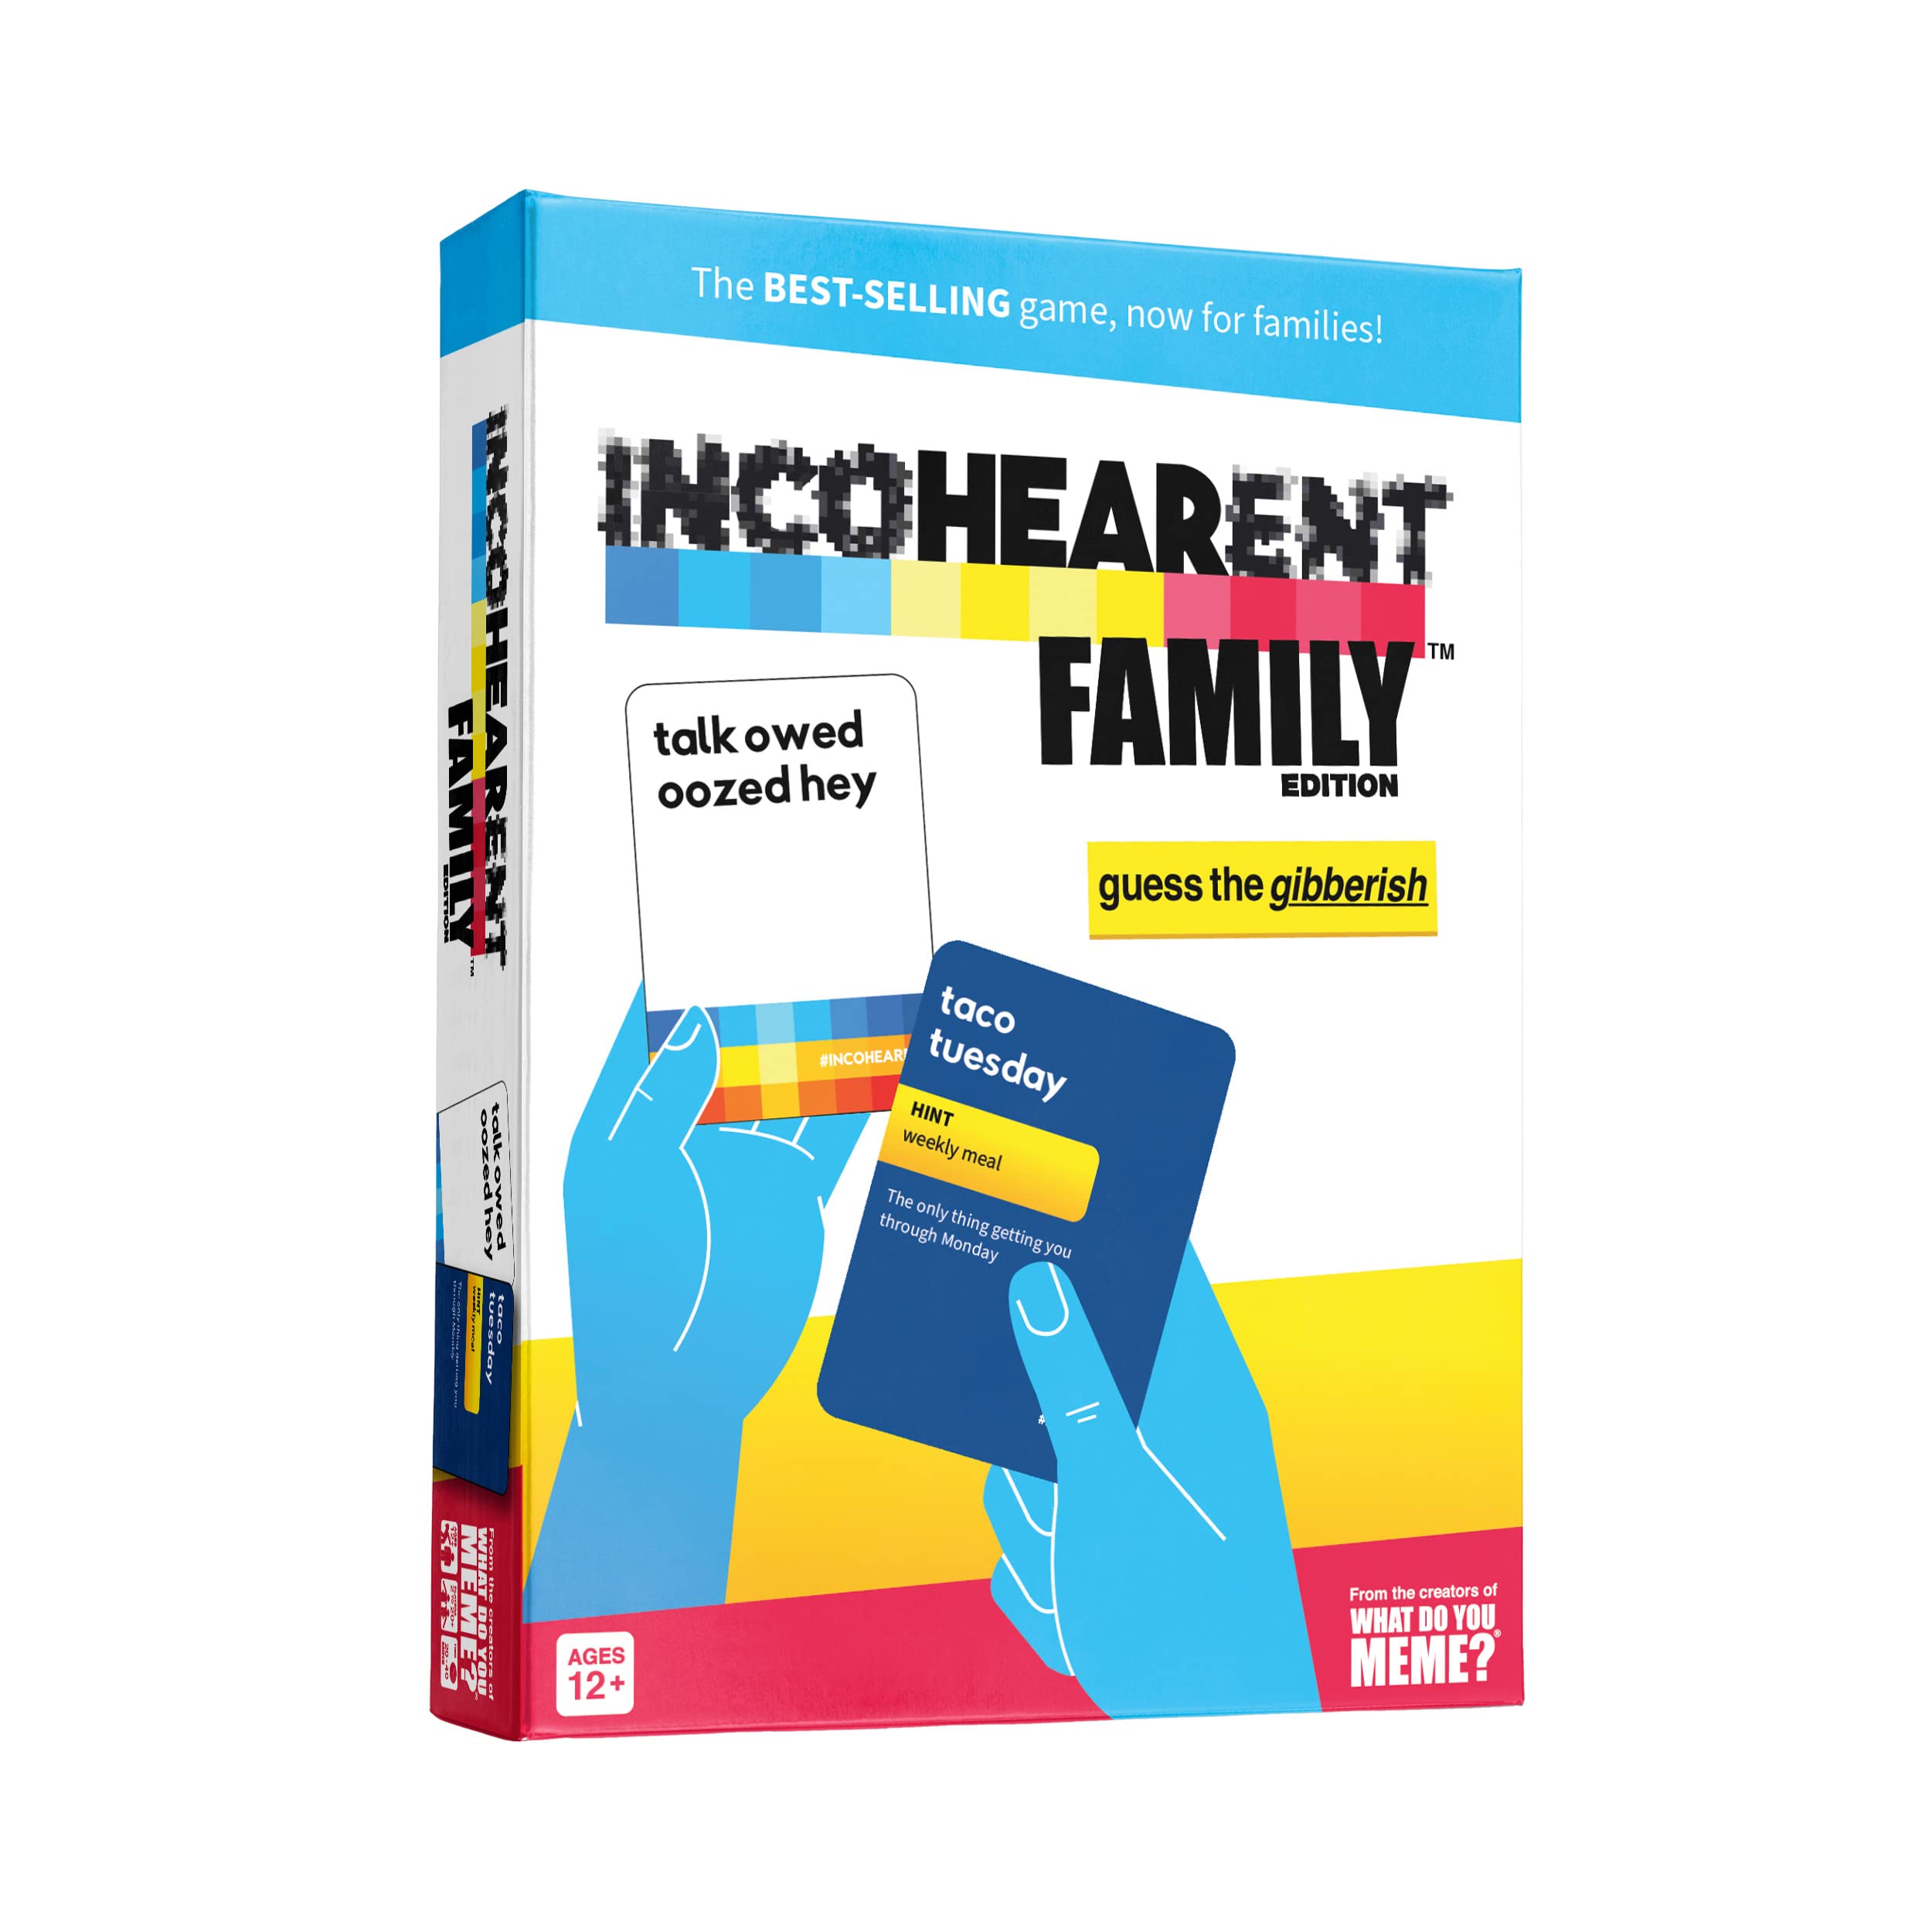 WHAT DO YOU MEME? Incohearent Family Edition - The Family Game Where You Compete to Guess The Gibberish - Family Card Games for Kids and Adults